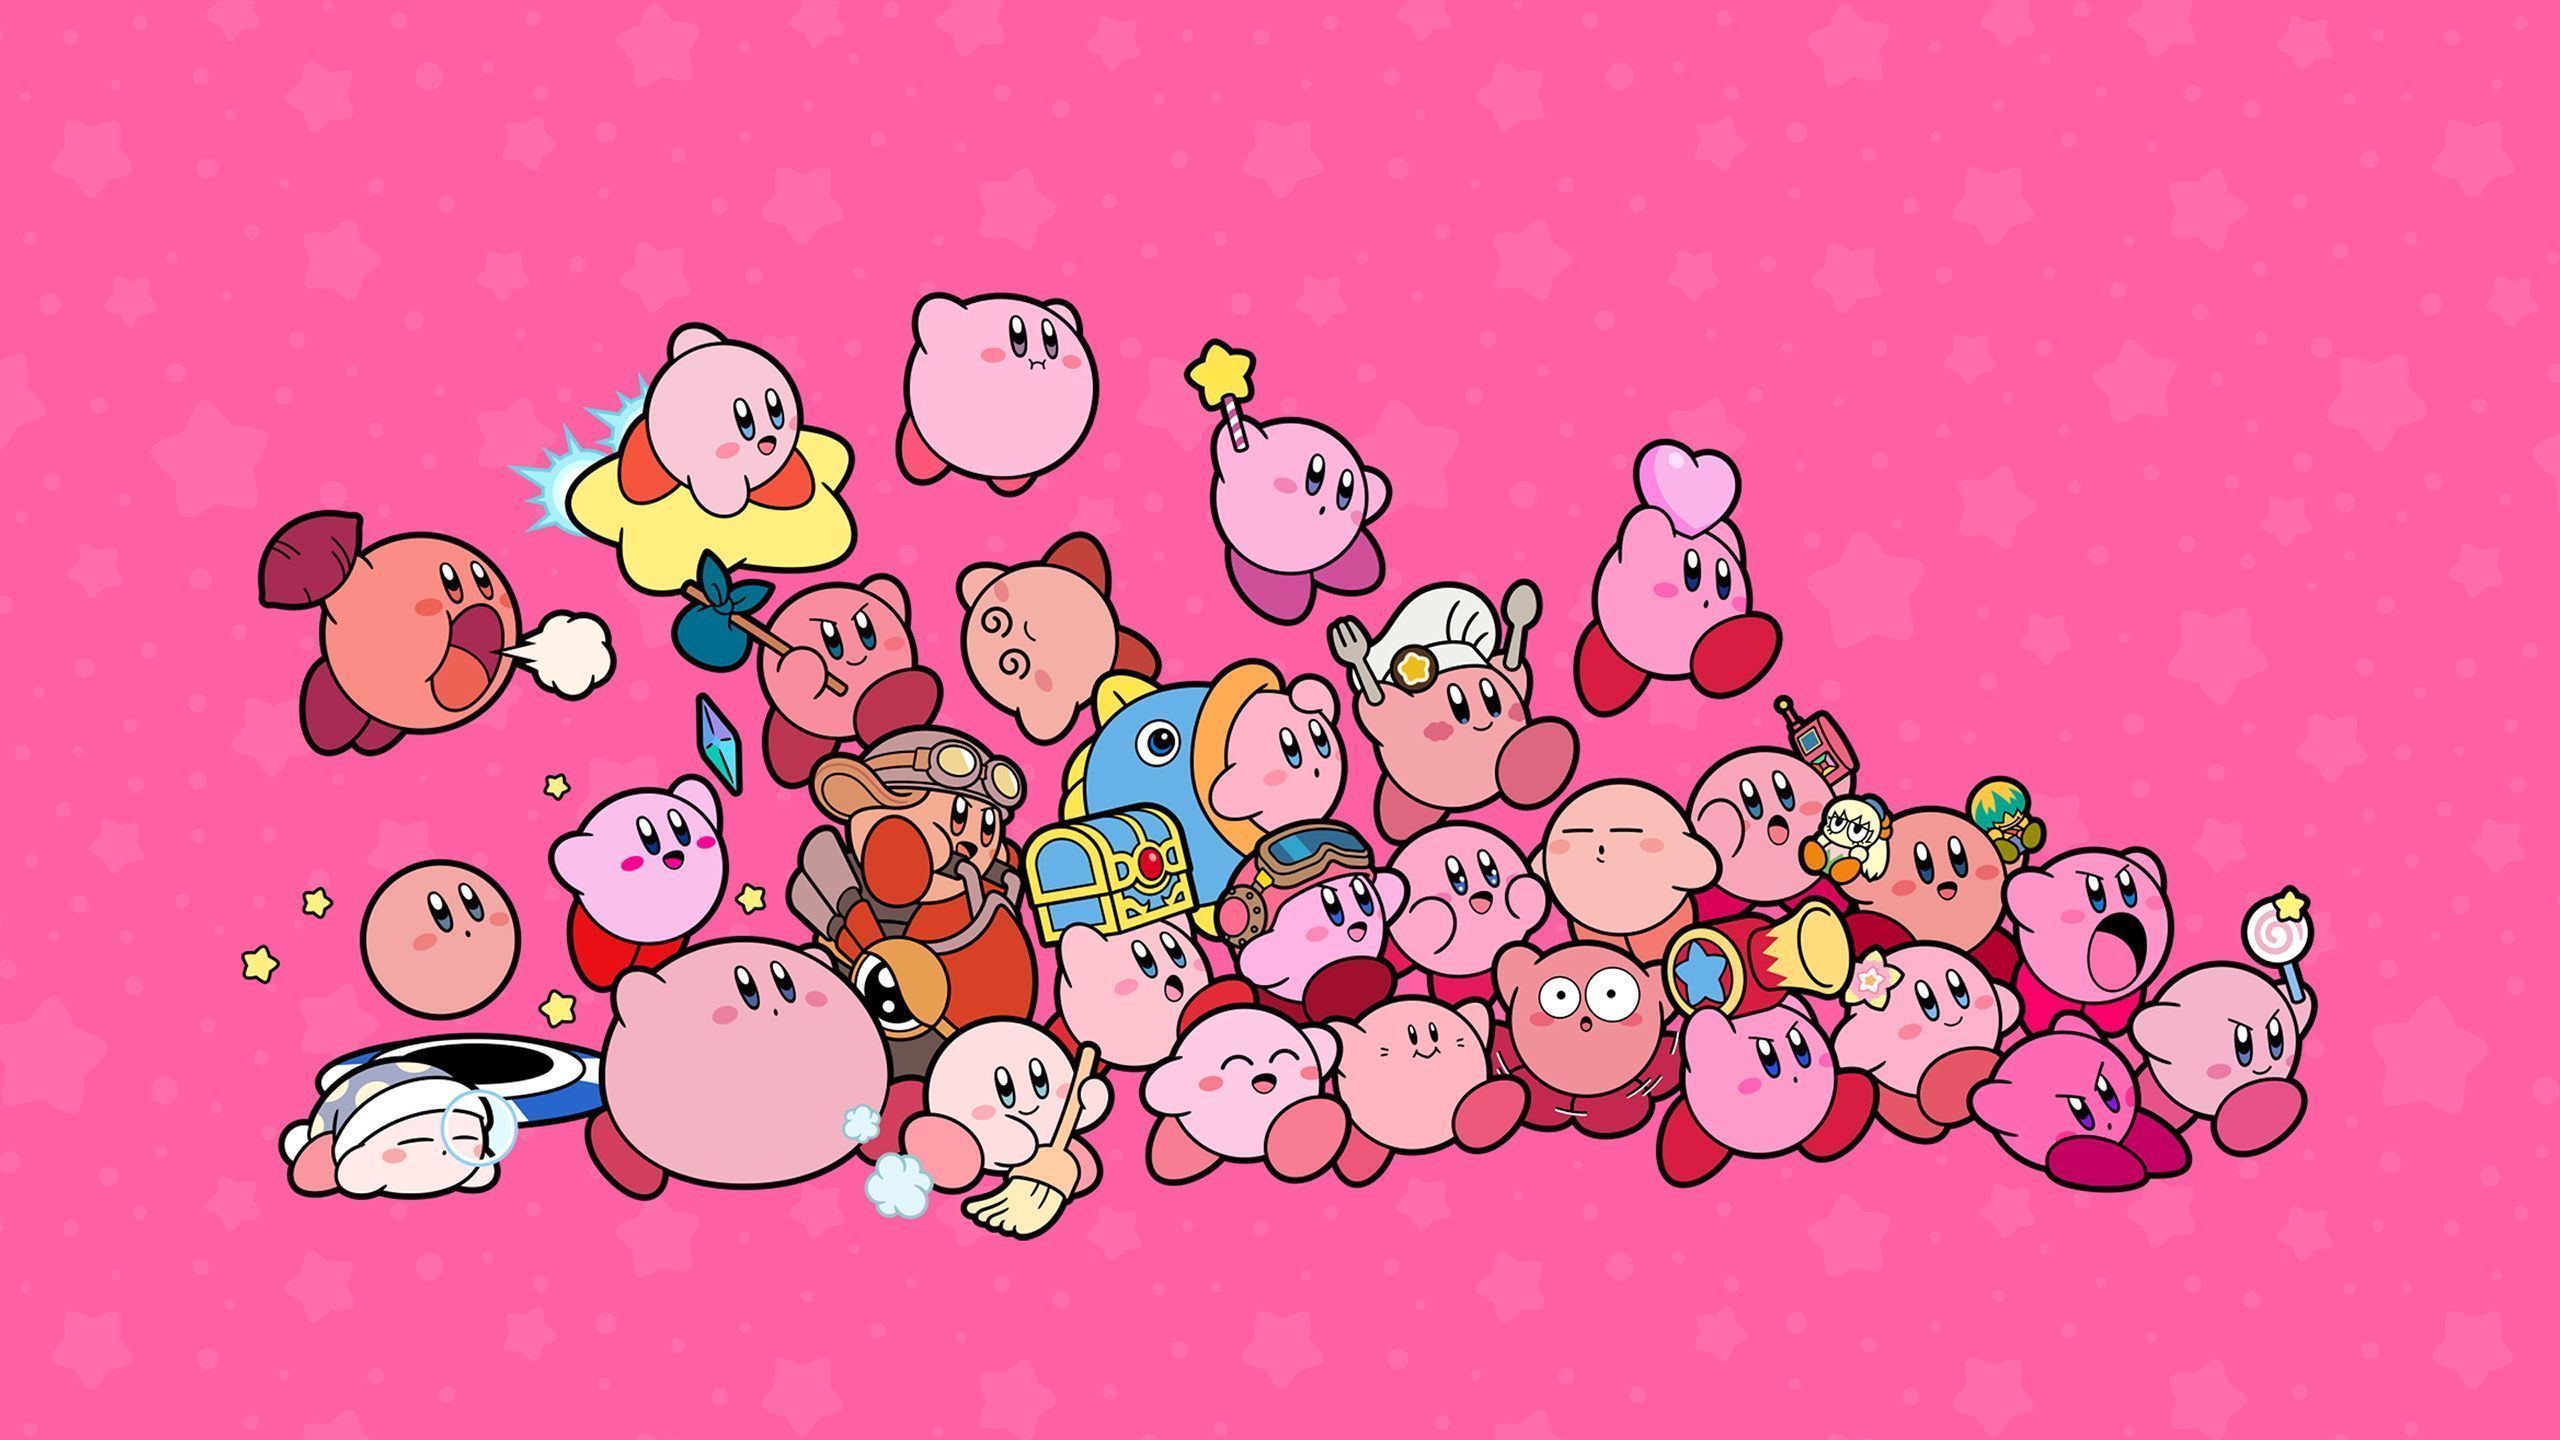 A wallpaper of many different Kirby's from the games. - Kirby